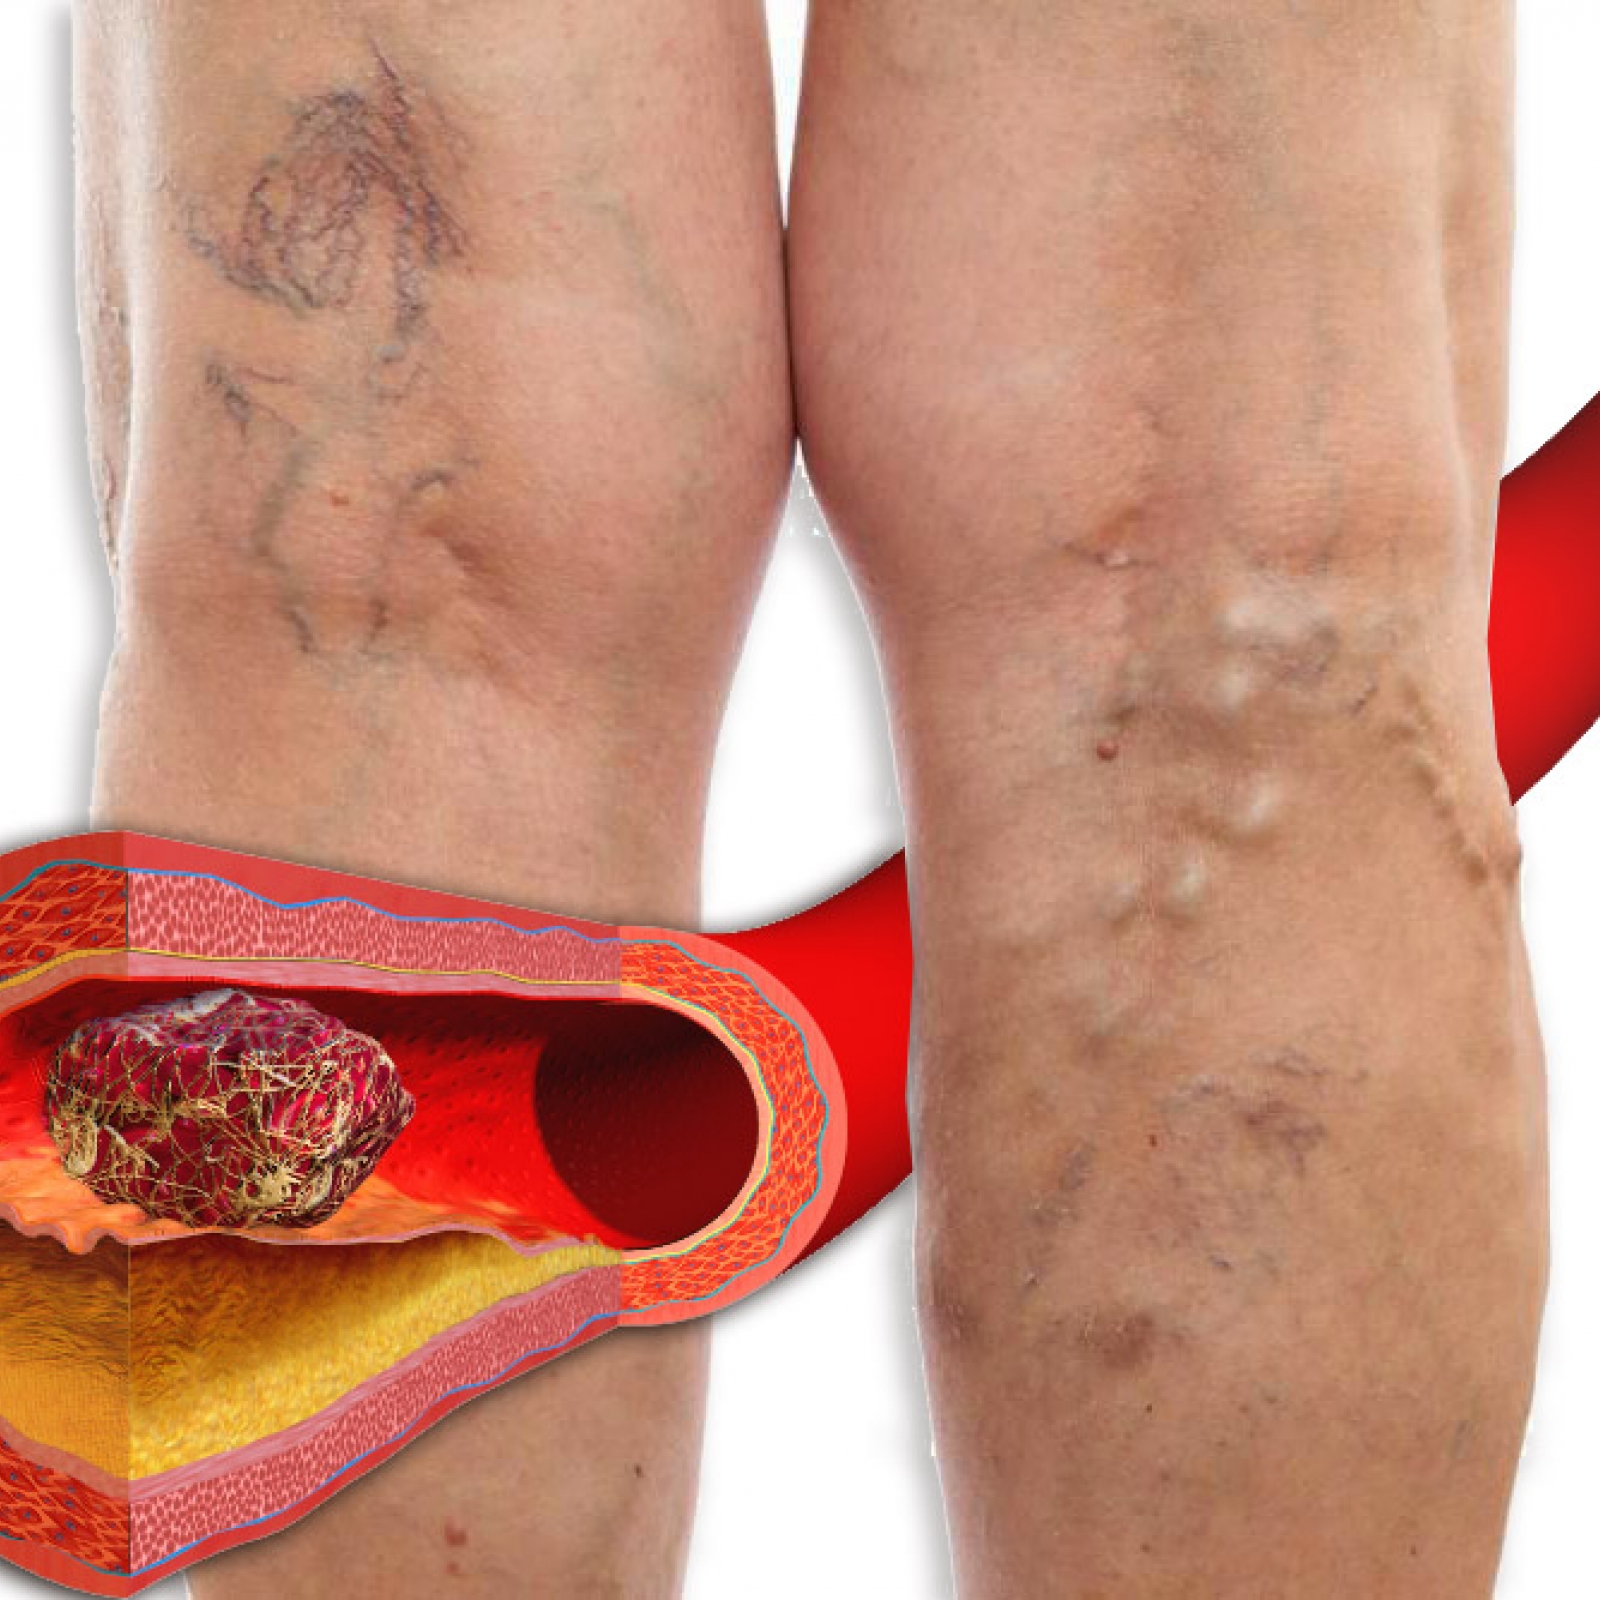 Why is varicose veins dangerous? | Vascular Center AngioLife®